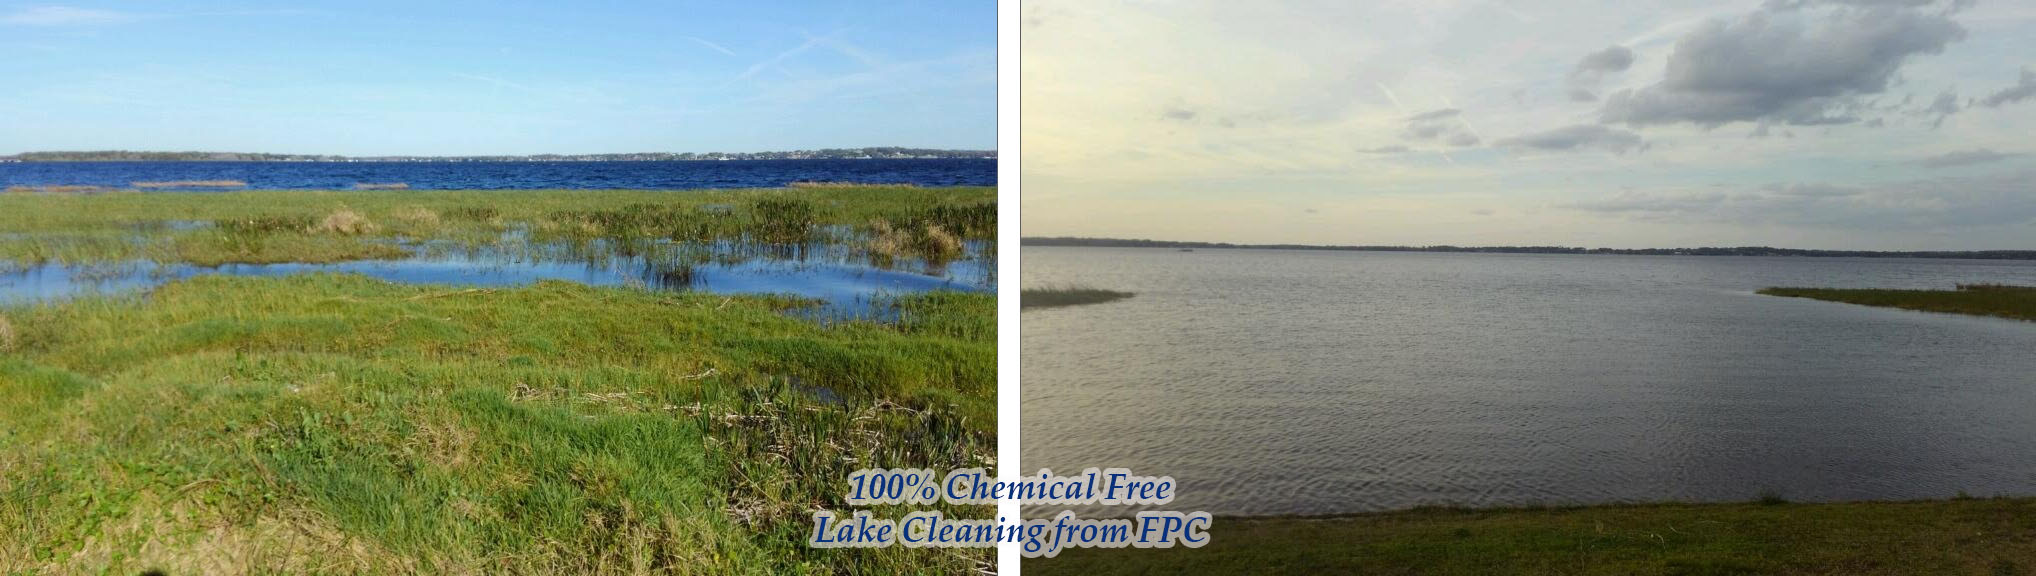 Lake Cleaning Companies, Lake Cleaning, Lakefront Cleaning, Lakefront Clearing, Lake Cleaning in